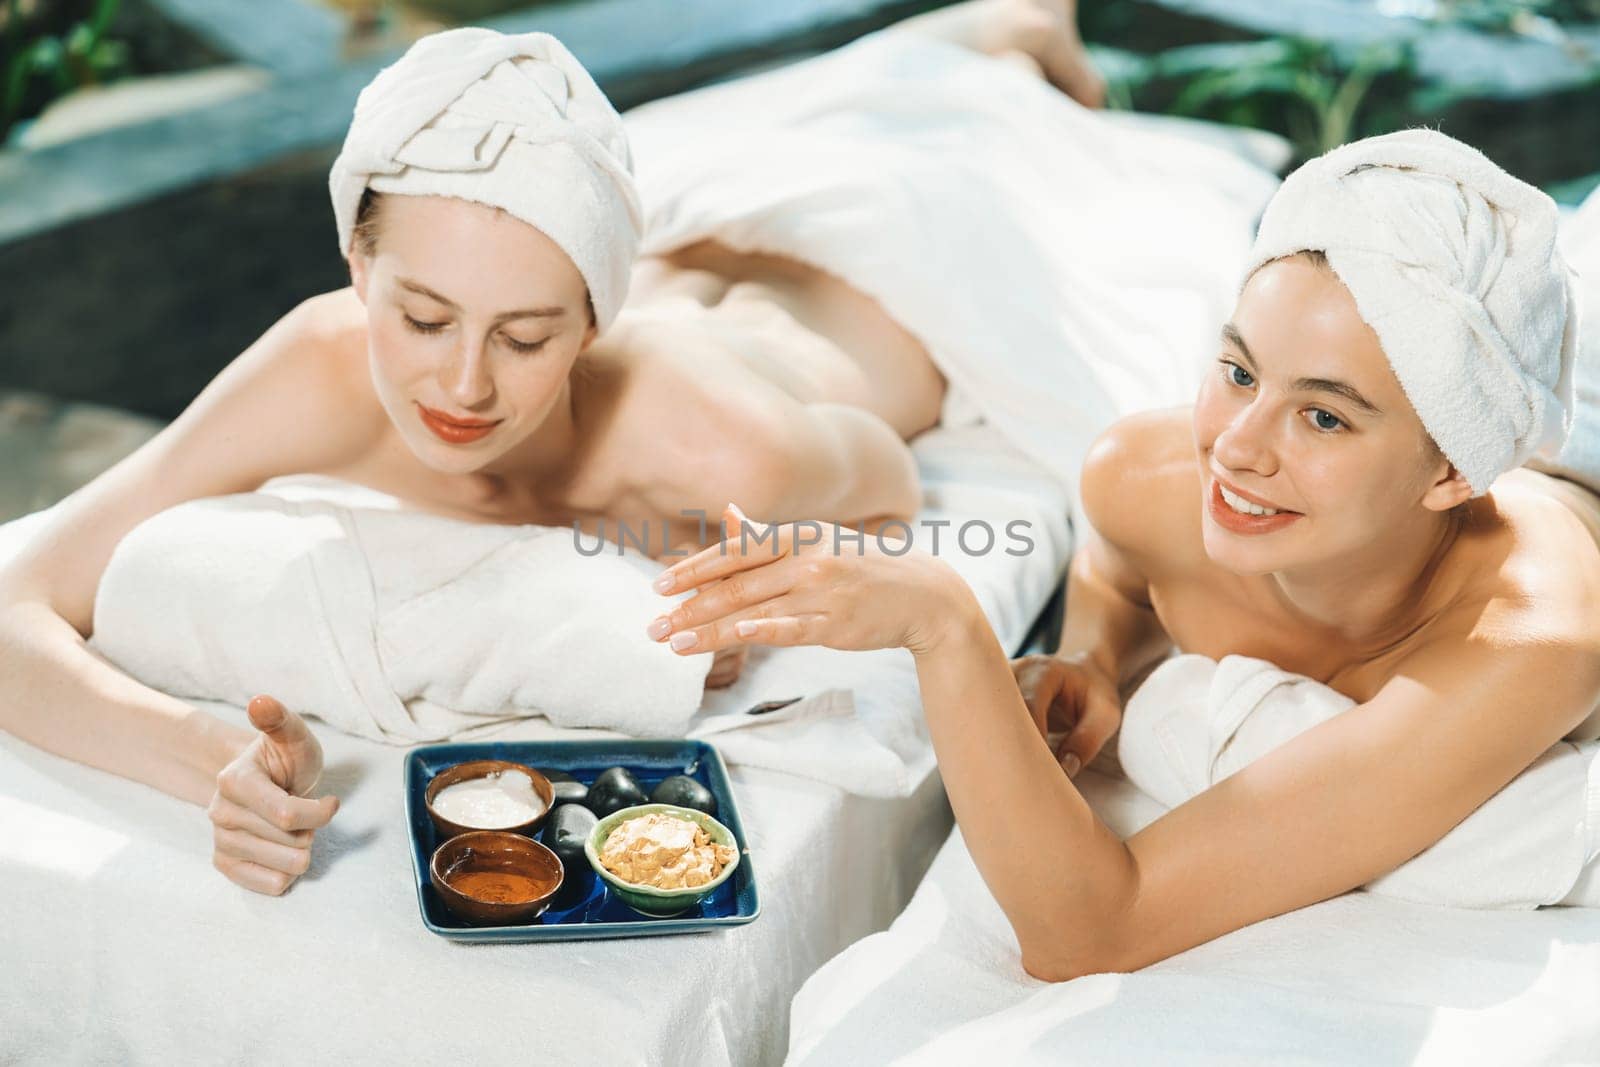 Couple of beautiful young girls lie on spa bed during interested in homemade beauty facial mask. Attractive woman touching herbal facial mask. Surrounded with nature environment. Tranquility.